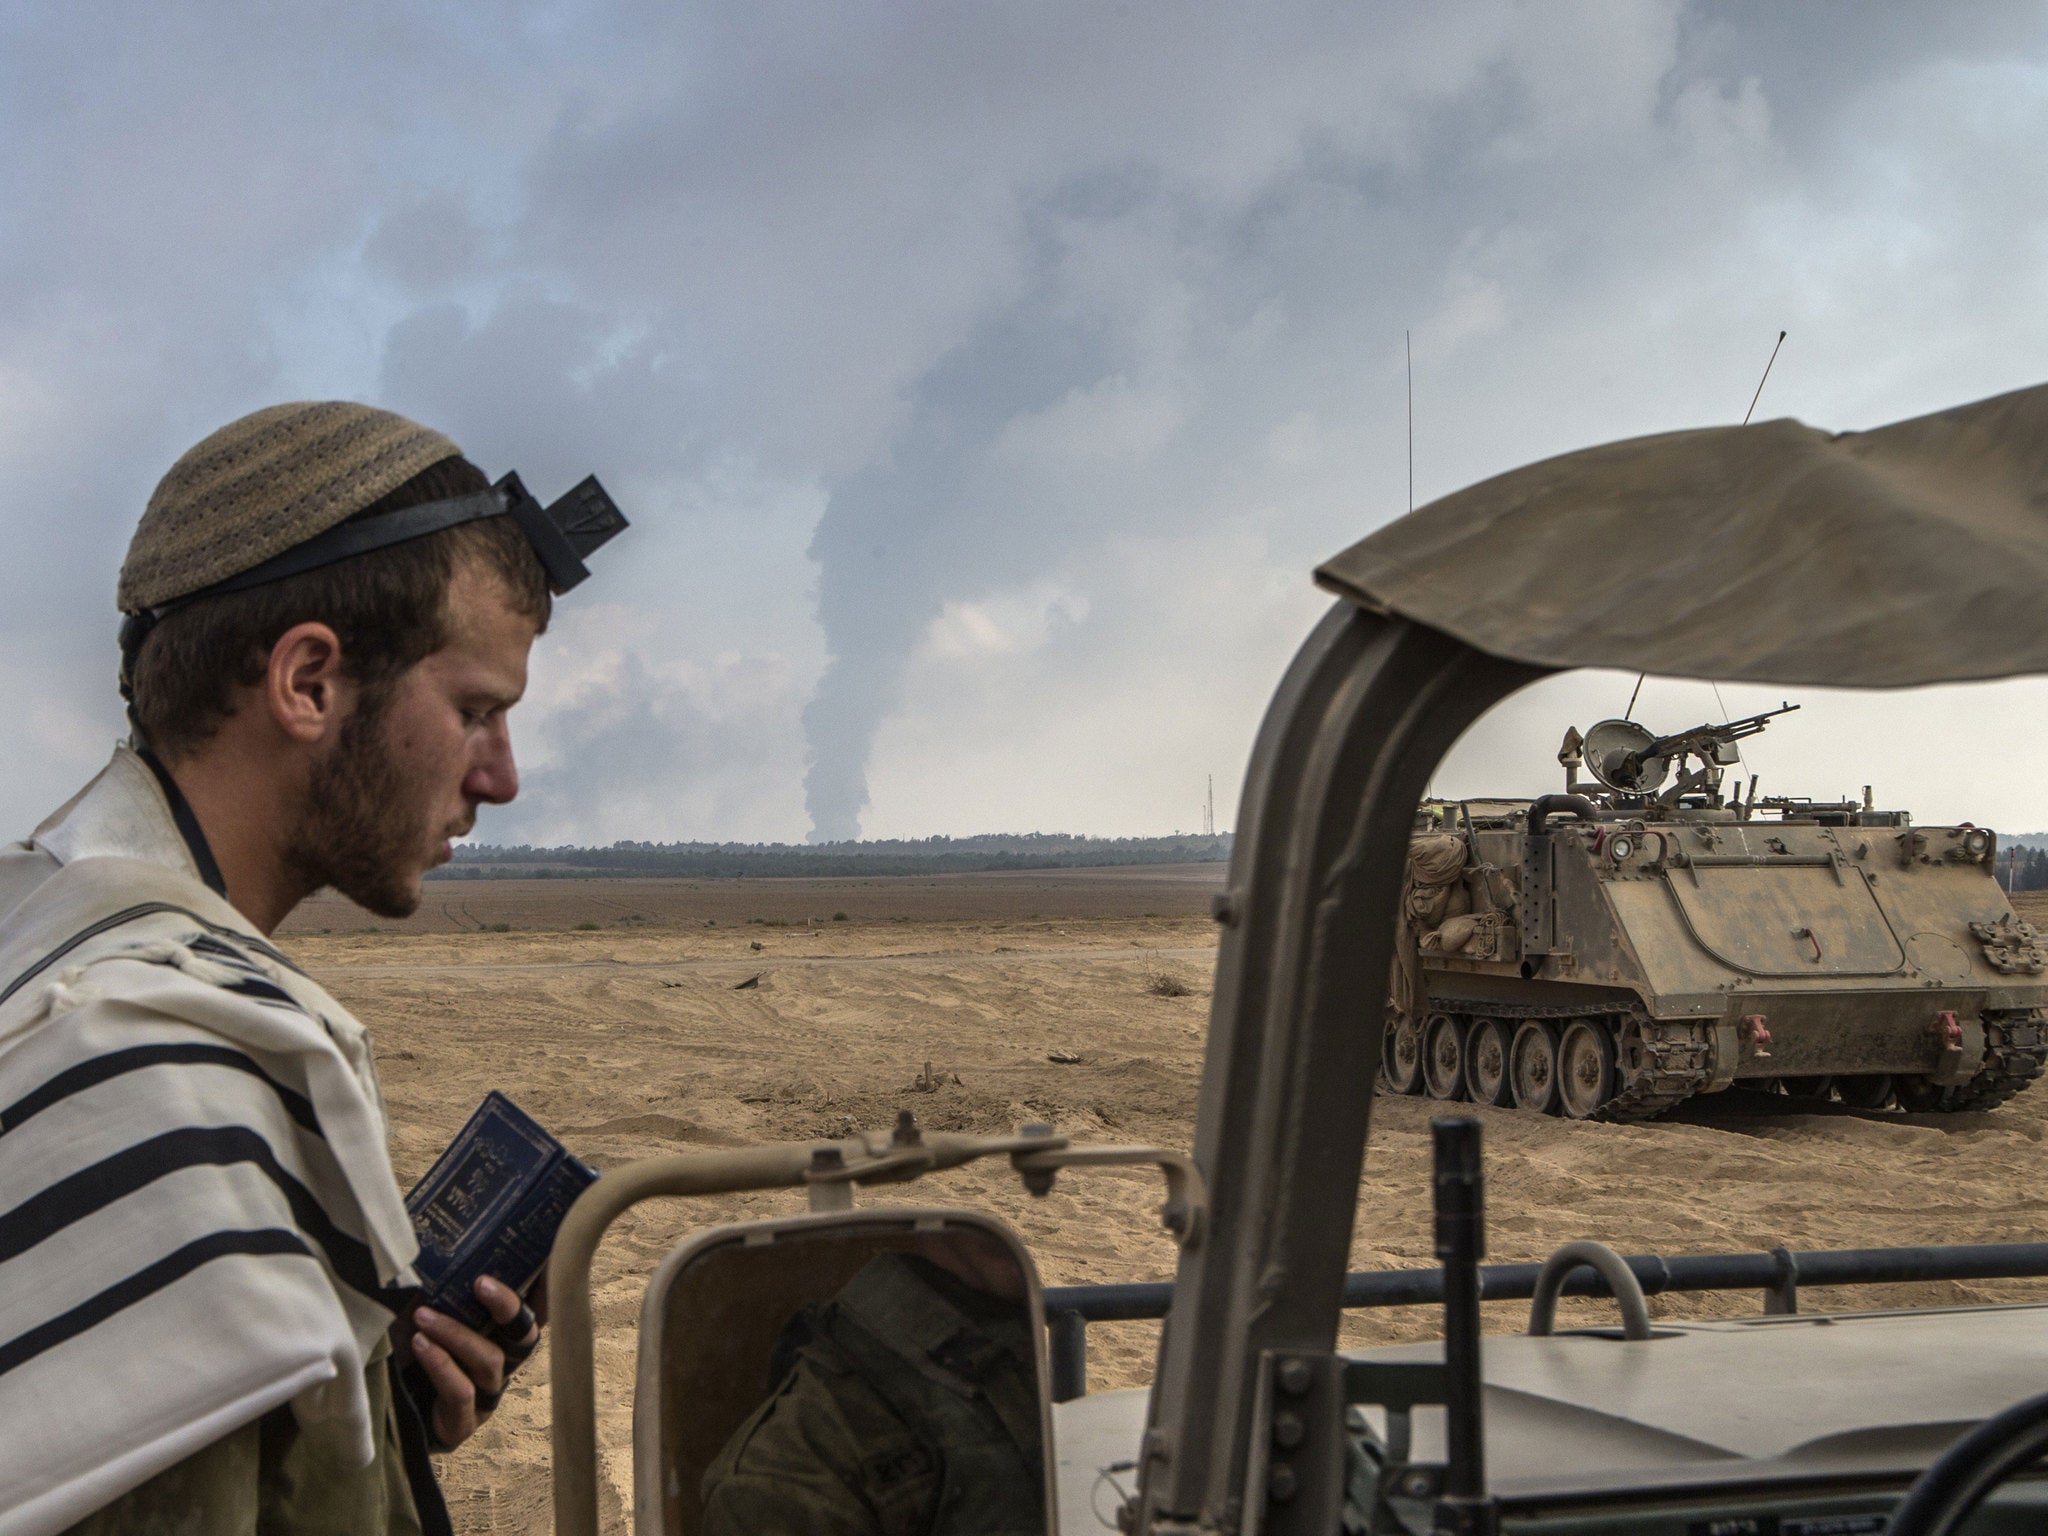 An Israeli soldier prays on the Israeli side of the border with the Gaza Strip, on July 29, 2014, as smoke billows from a power plant following overnight Israeli shelling in the coastal Palestinian enclave.